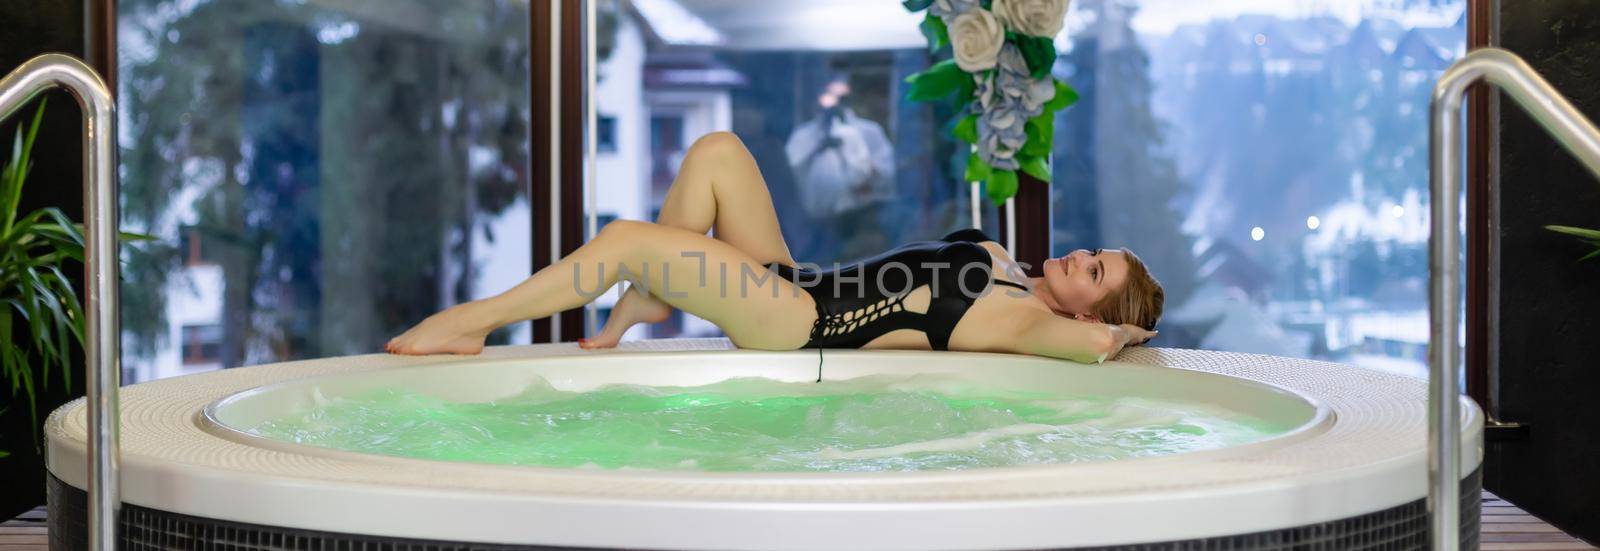 Pretty young woman relaxing in the whirlpool bathtub by Andelov13